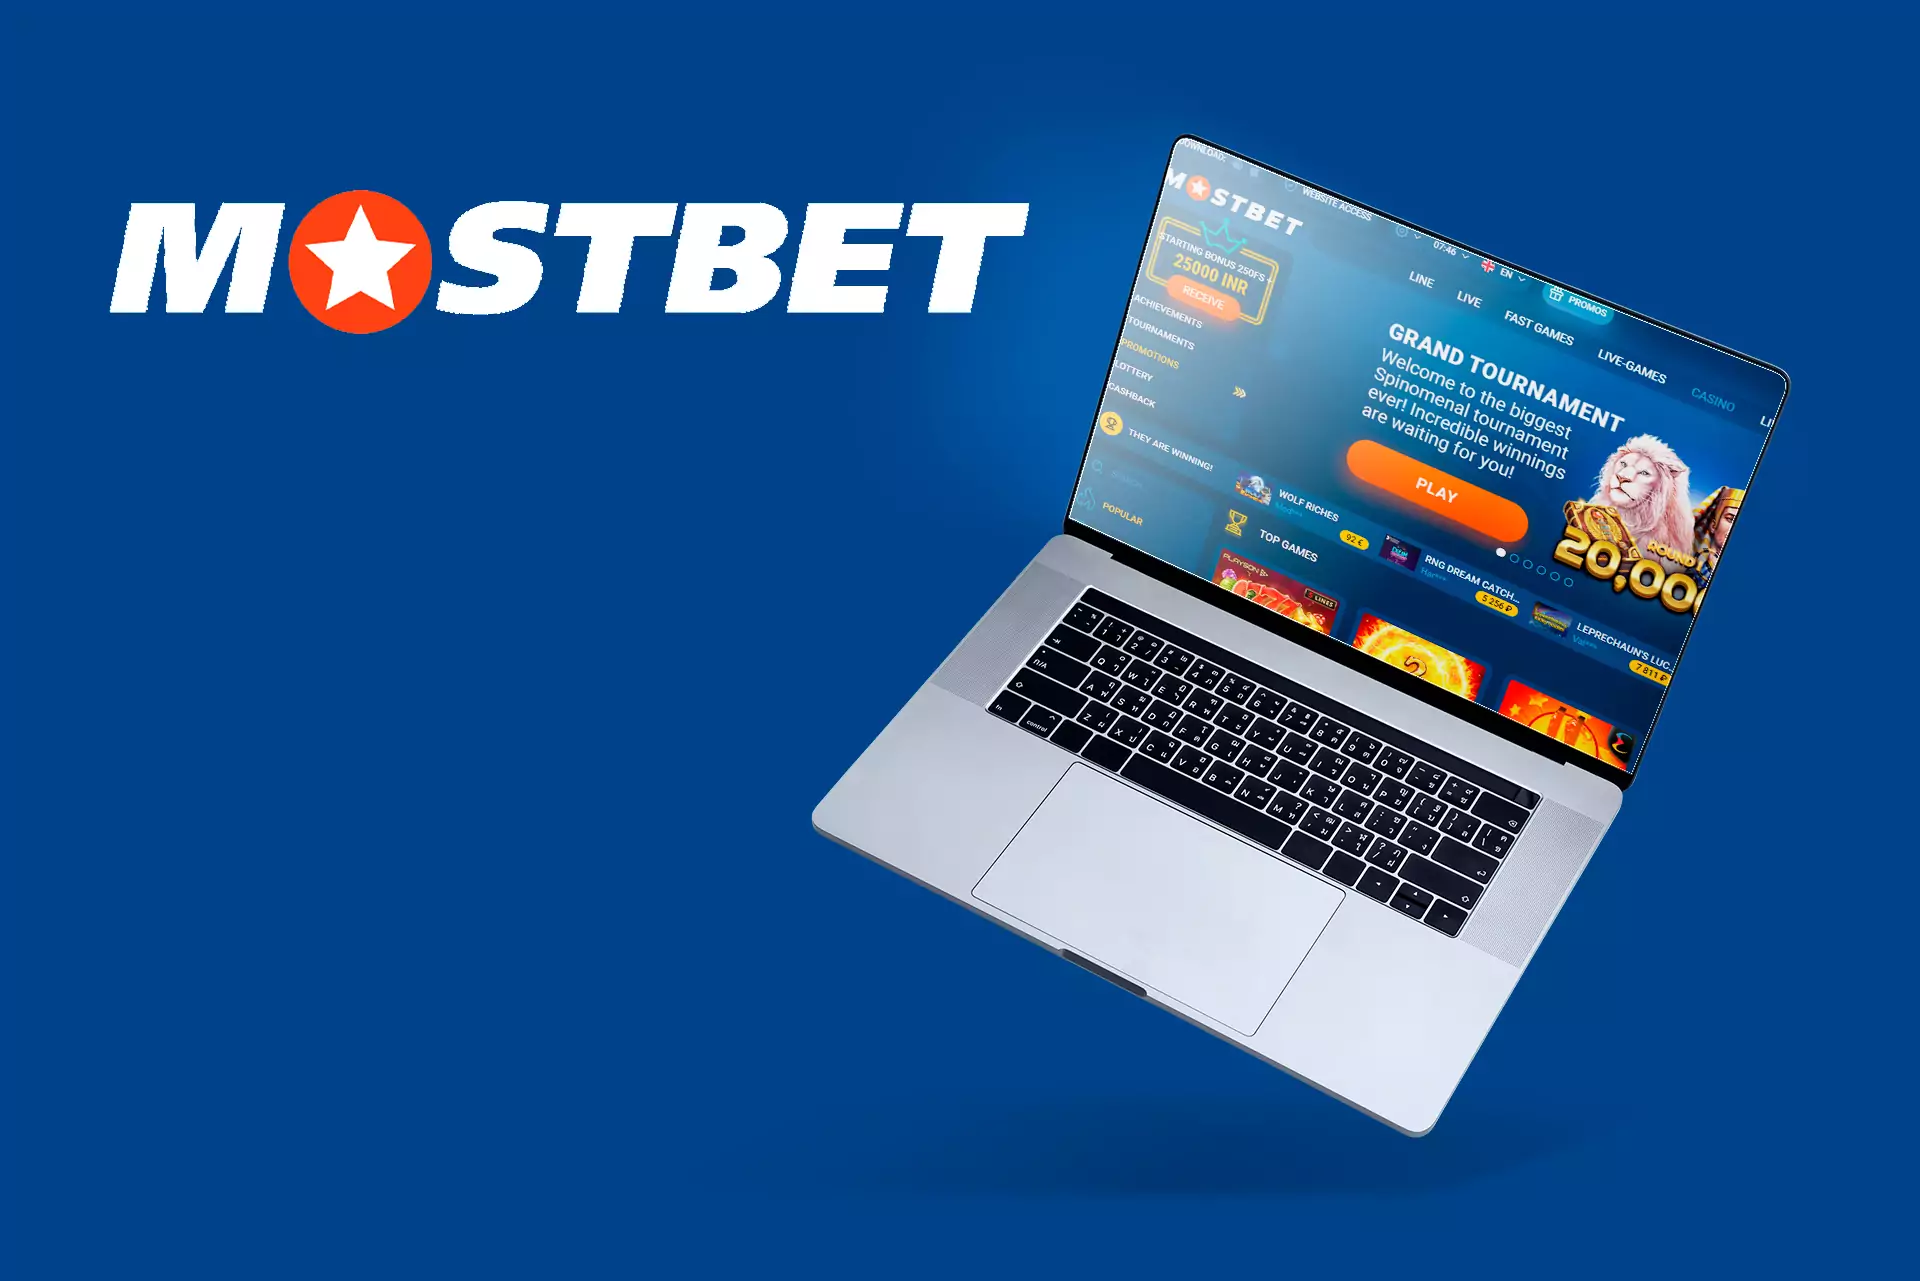 Register at the Mostbet site and get a lucrative bonus on gambling.